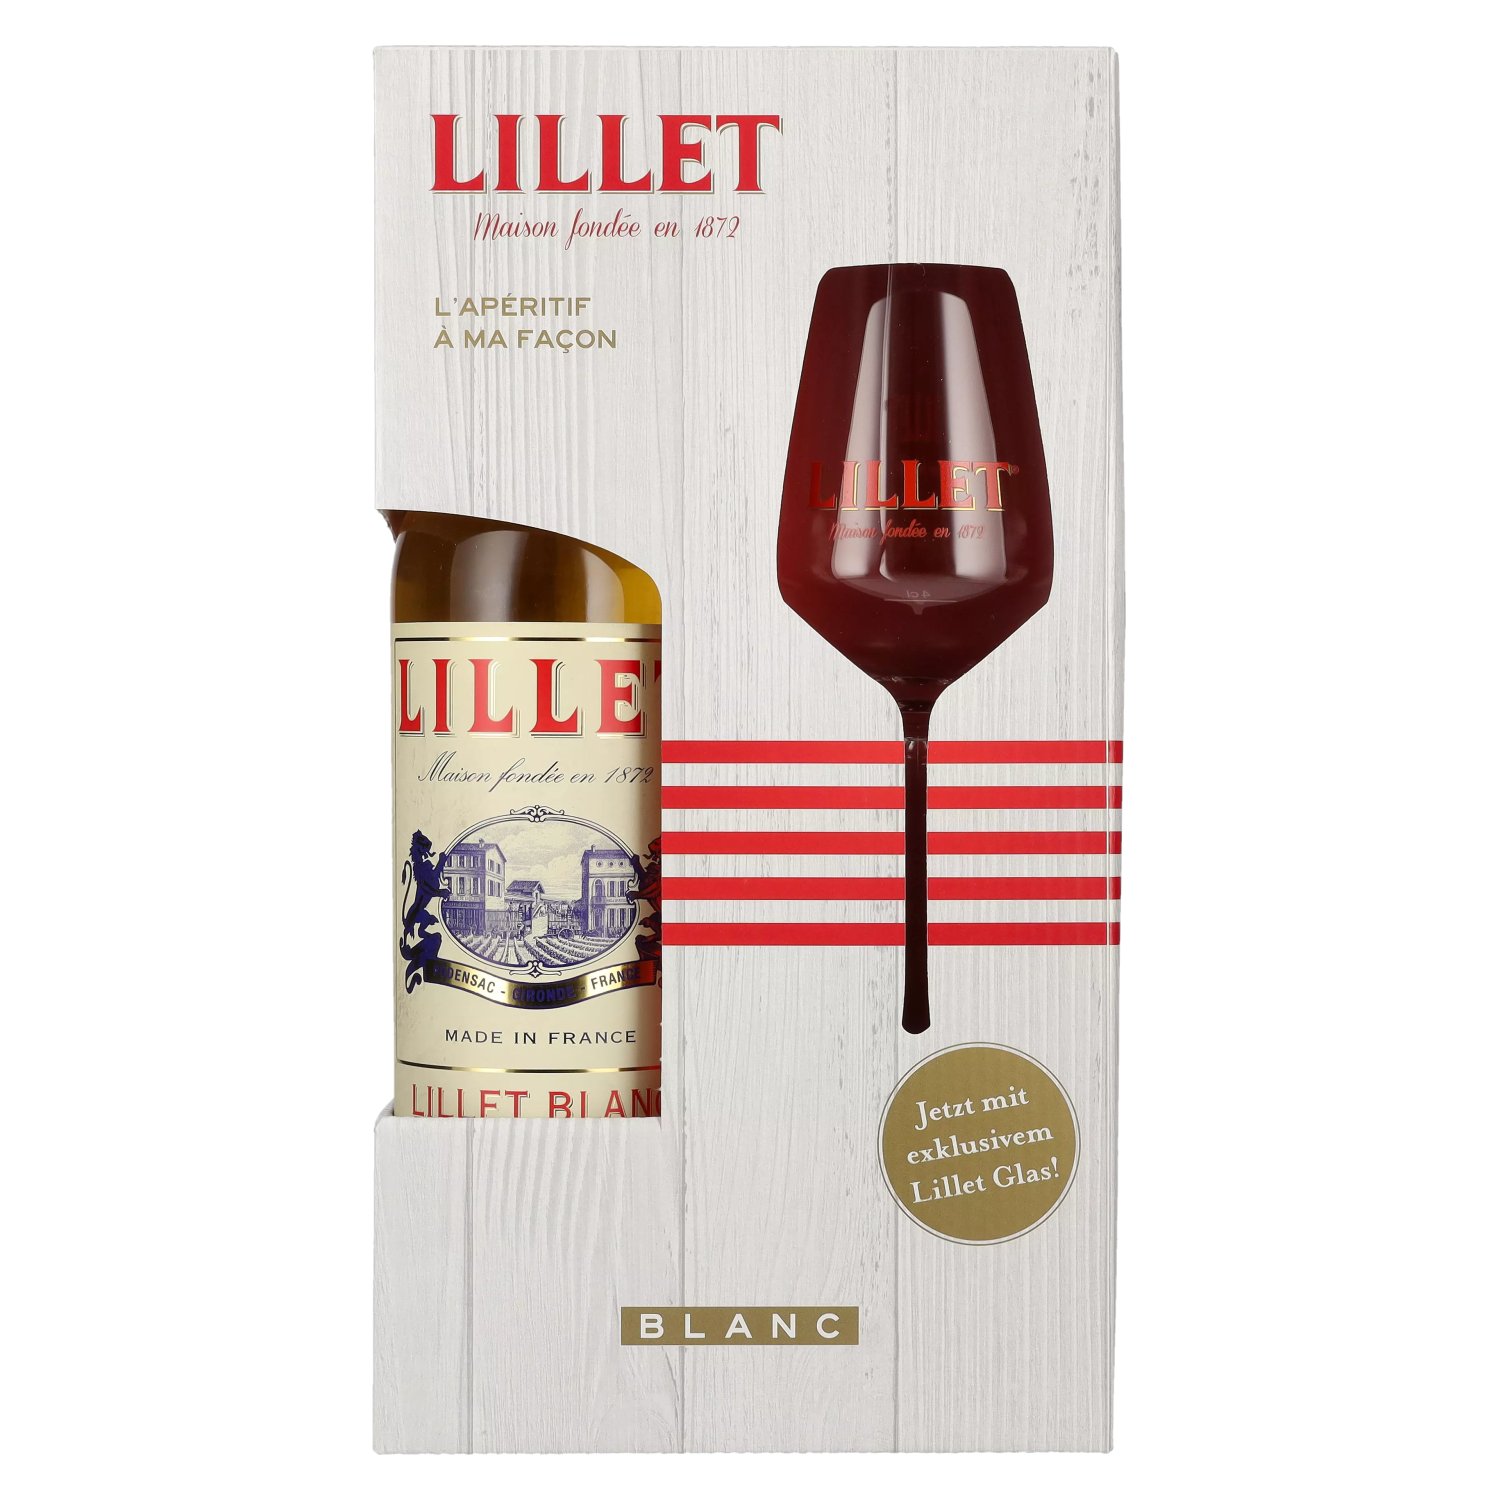 Lillet Blanc 17% Vol. 0,75l in Giftbox with glass